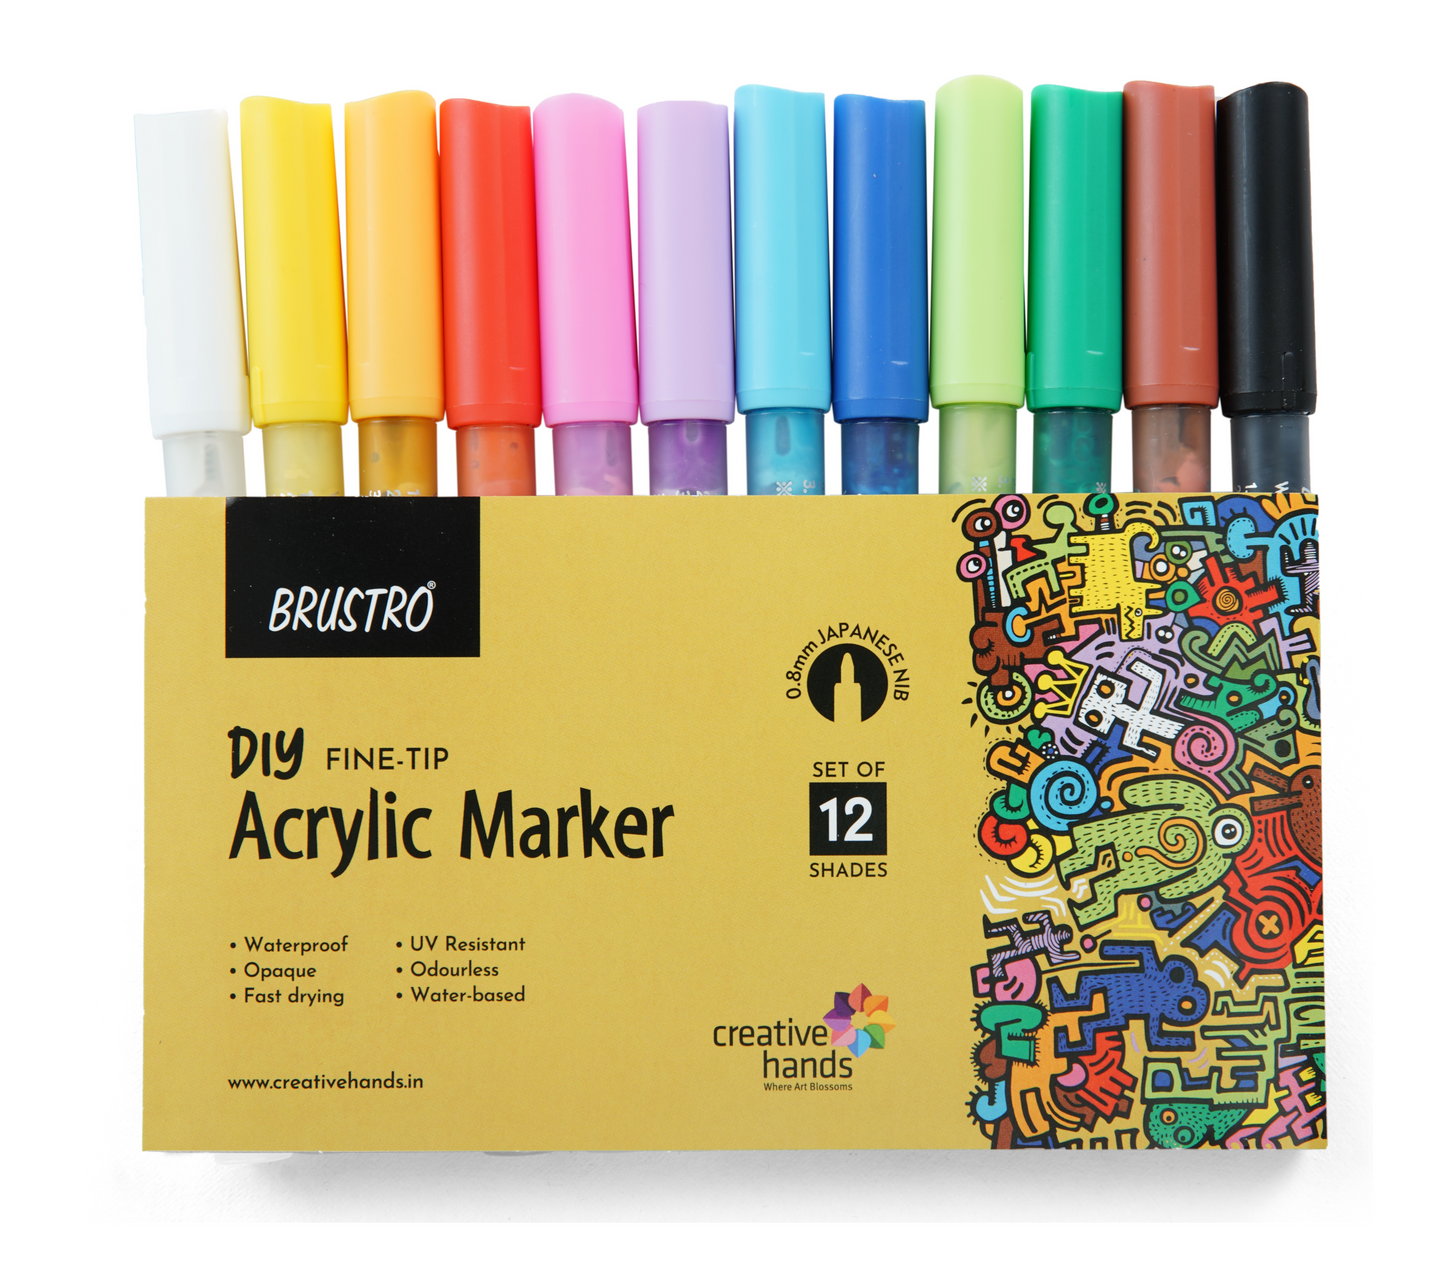 Brustro Acrylic (DIY) Fine Tip Marker Set of 12 - Basic 0.8MM for Craftworks, School Projects, and Other Presentations